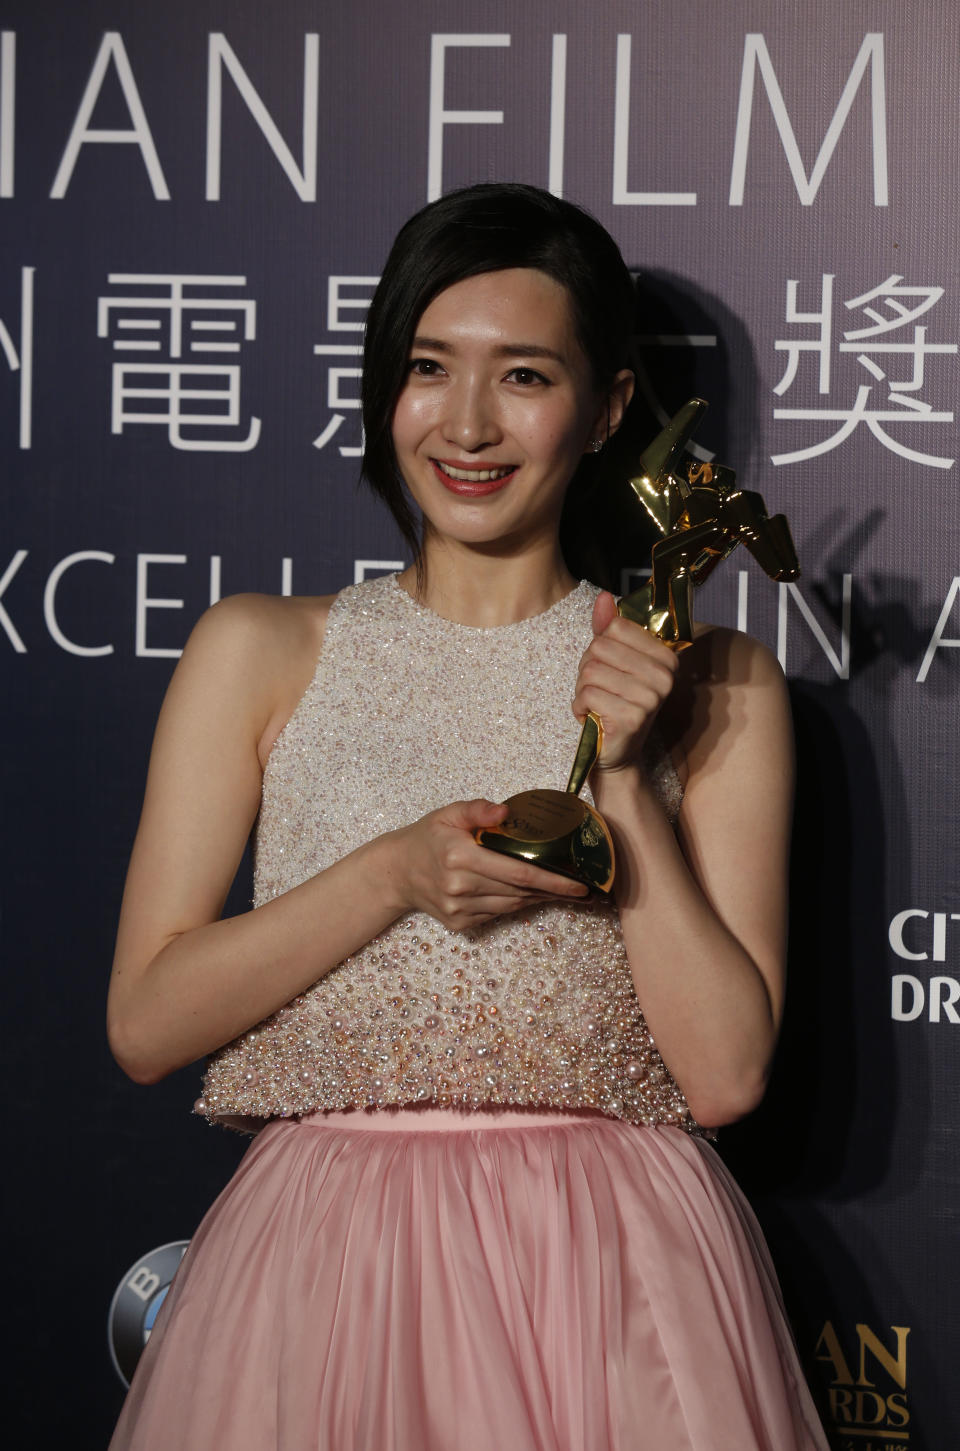 Chinese actress Jiang Shu Ying celebrates after winning the Best Newcomer for her movie "So Young" of the Asian Film Awards in Macau Thursday, March 27, 2014. (AP Photo/Kin Cheung)